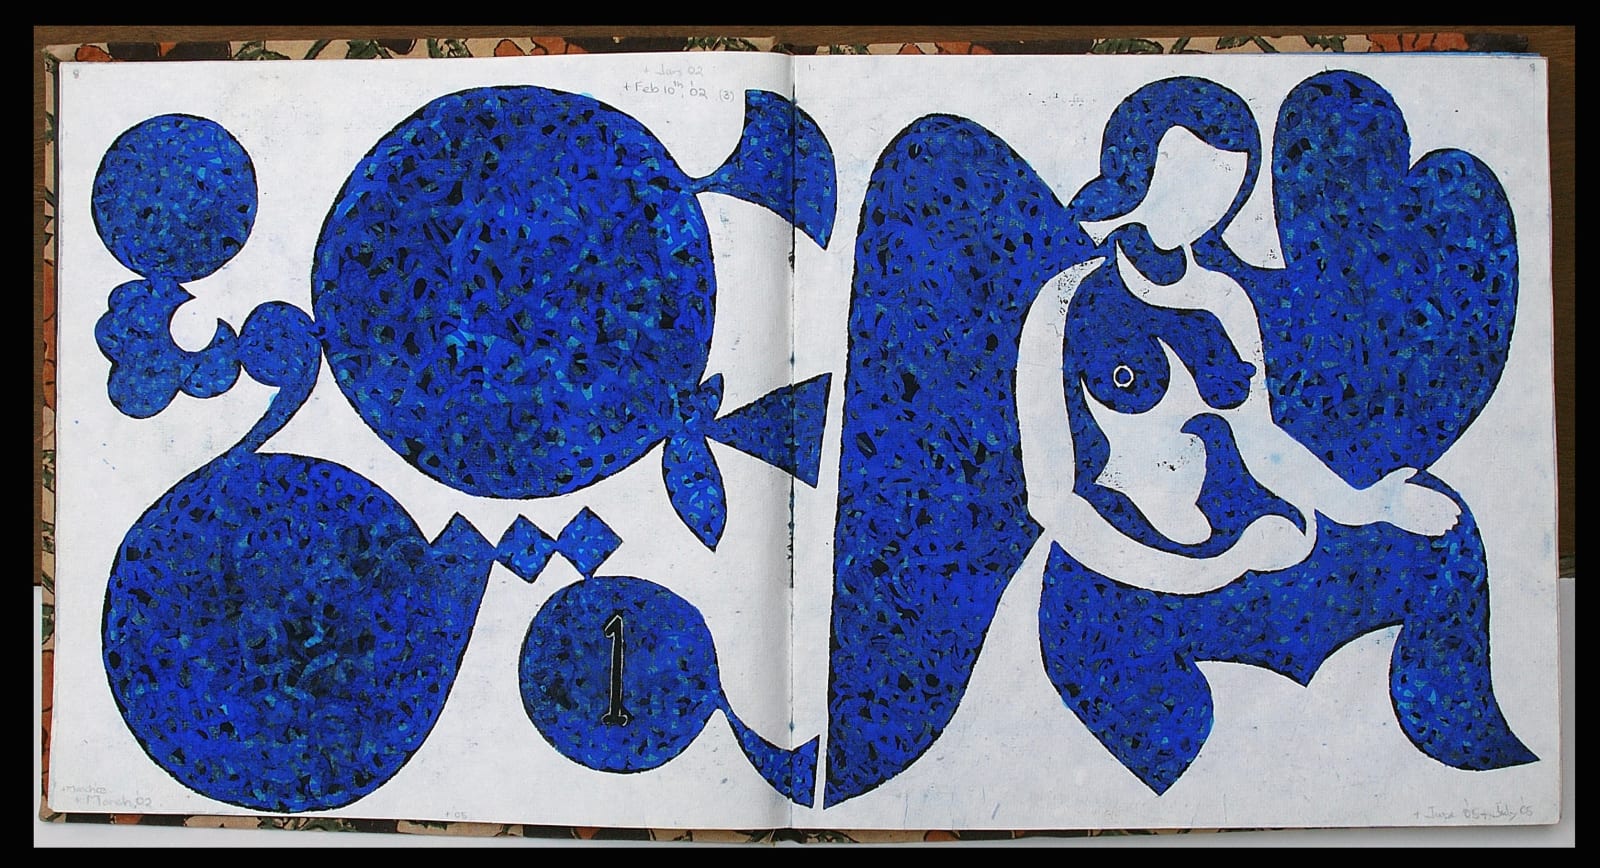 Saleem Arif Quadri (1949-) Caressing with the Constellations (Part of a current manuscript book series) 2002-07 Image from a Manuscript Book of over 100 pages Watercolour, gouache on paper with ingrained dry flowers, pen and ink 30.5 x 61 cm Image courtesy the artist © Saleem Quadri